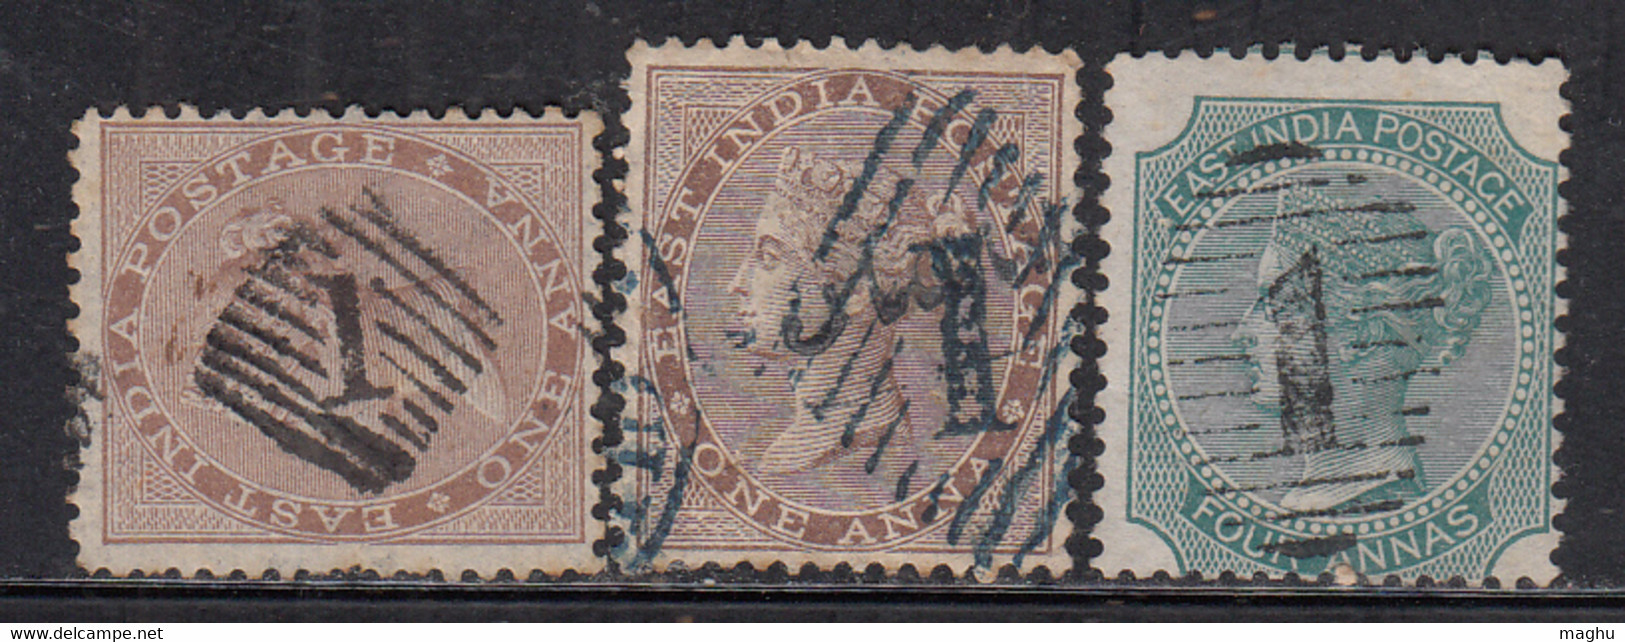 3 Diff., Varities Of Bombay, Local, Cooper / Renouf Type 4 & 15 , British East India Used, Early Indian Cancellations - 1854 Britische Indien-Kompanie